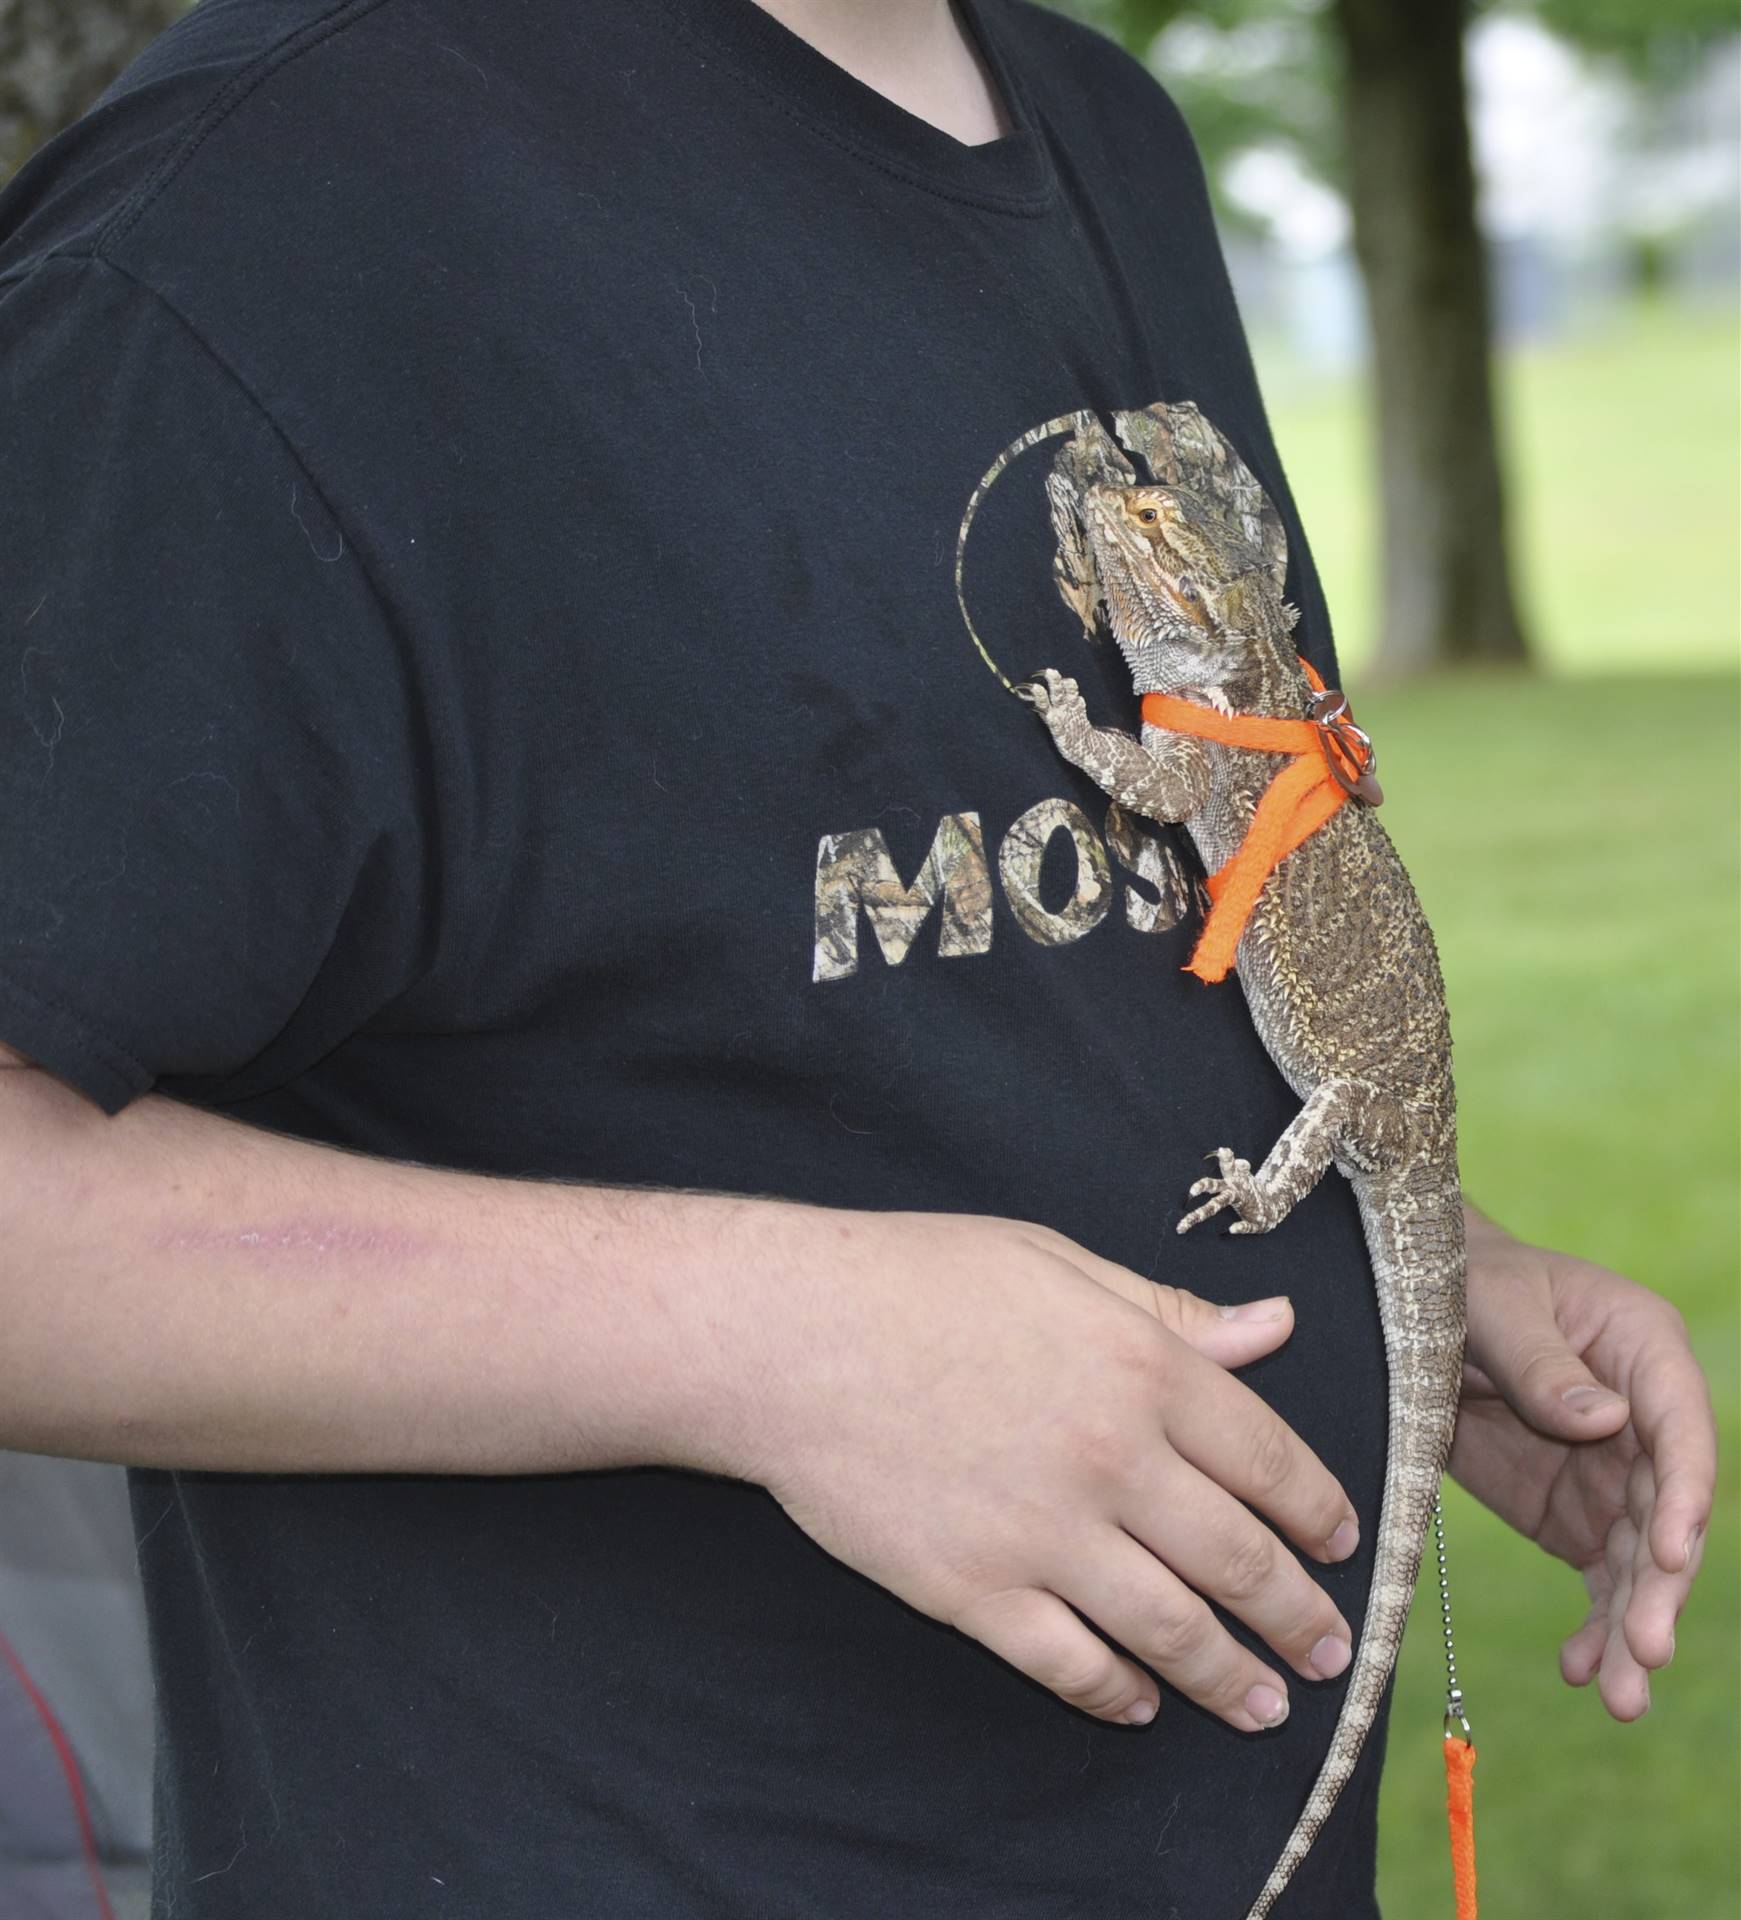 A lizard crawls up a shirt at the creature feature campout.